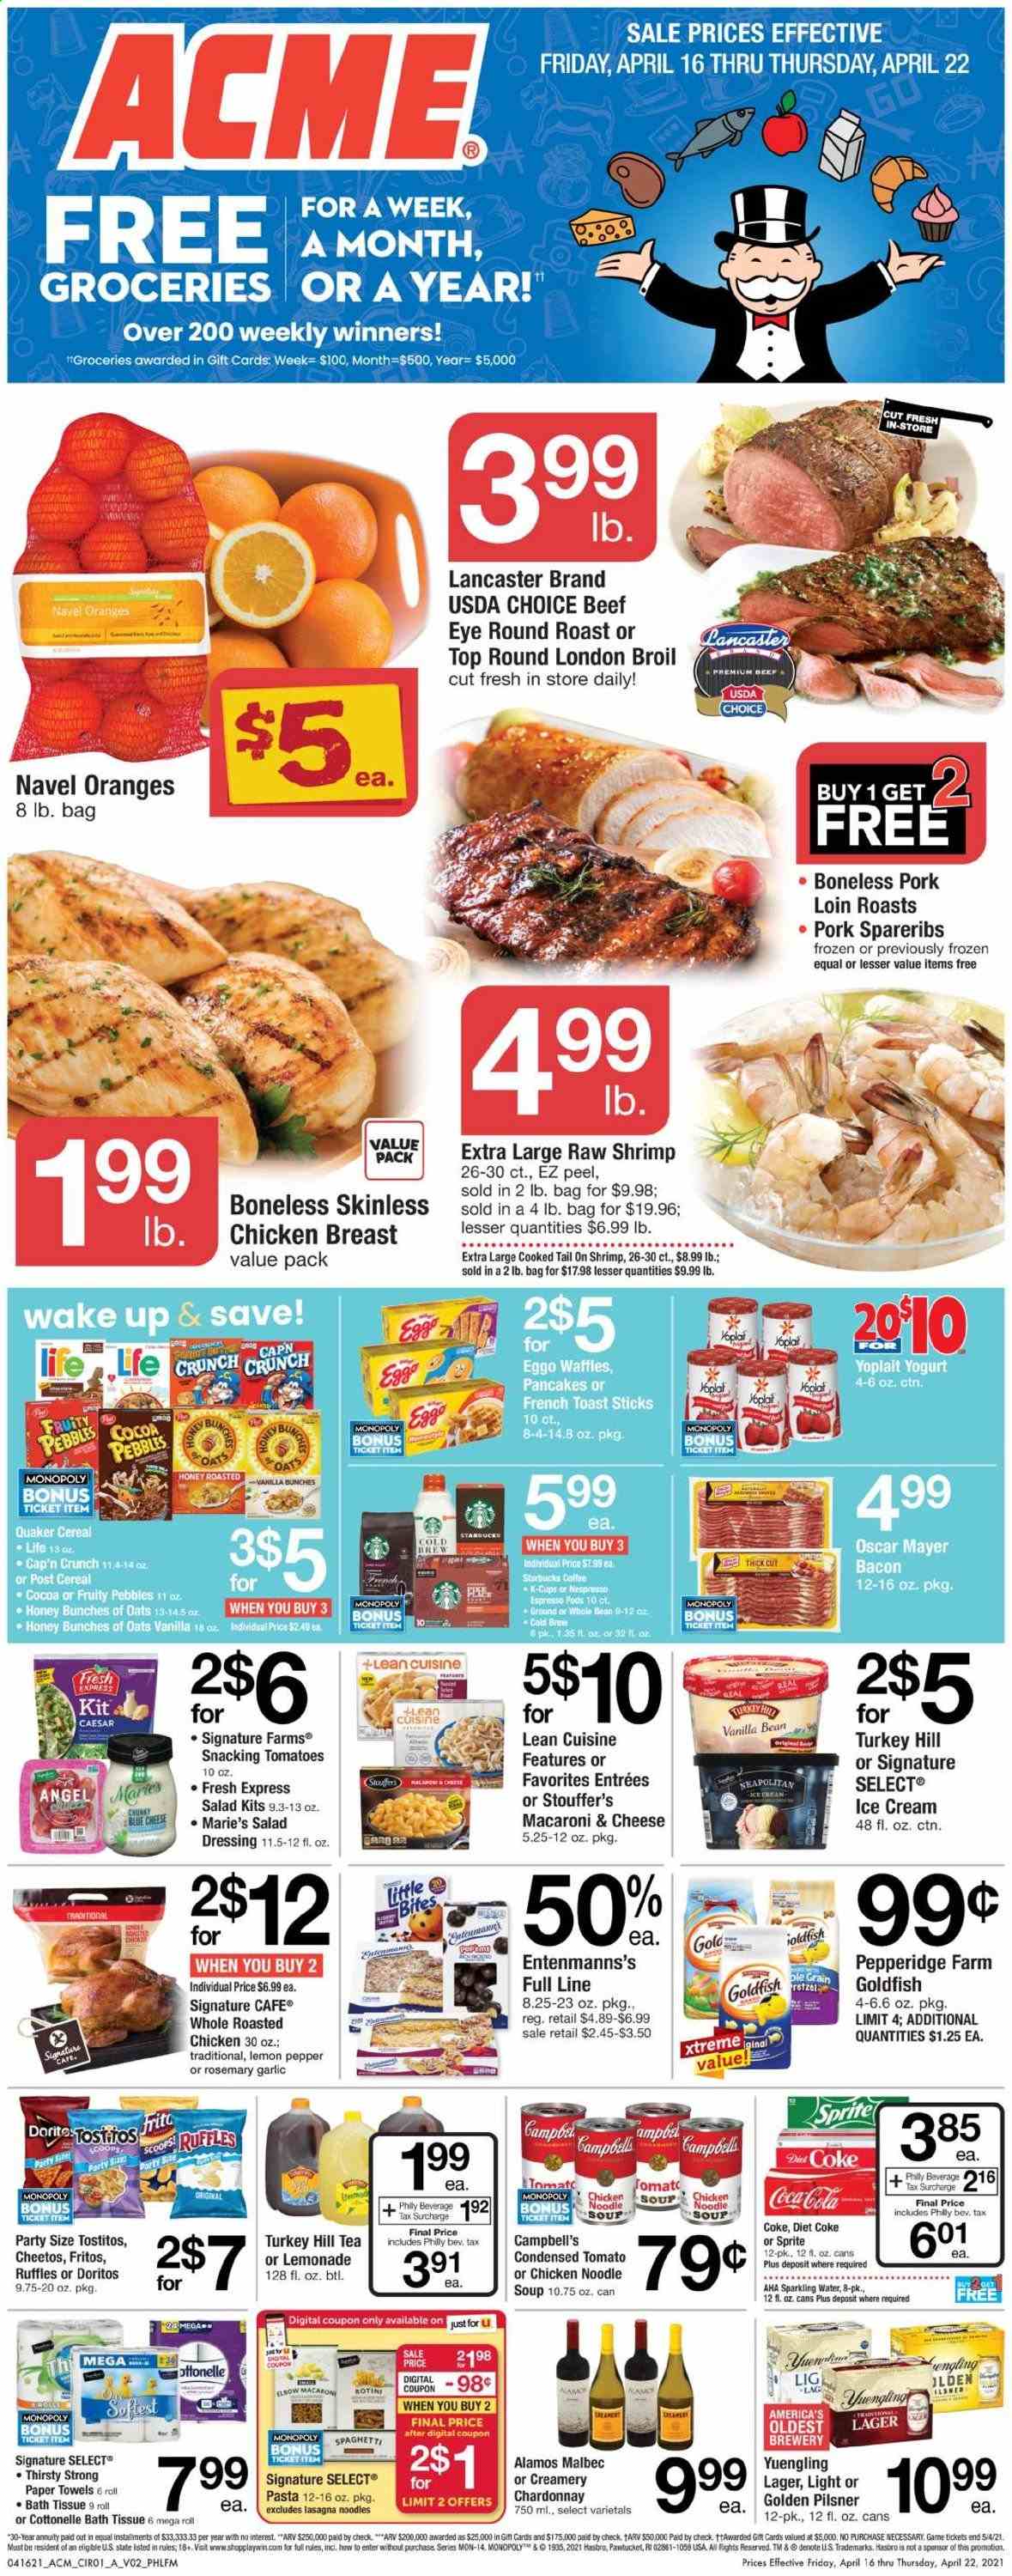 thumbnail - ACME Flyer - 04/16/2021 - 04/22/2021 - Sales products - waffles, garlic, tomatoes, oranges, shrimps, Campbell's, macaroni & cheese, spaghetti, chicken roast, soup, pasta, noodles cup, Quaker, noodles, Lean Cuisine, bacon, Oscar Mayer, yoghurt, Yoplait, ice cream, Stouffer's, Doritos, Fritos, Cheetos, Goldfish, Ruffles, Tostitos, cereals, Cap'n Crunch, Fruity Pebbles, rosemary, salad dressing, dressing, Coca-Cola, lemonade, Sprite, Diet Coke, sparkling water, tea, red wine, white wine, Chardonnay, wine, beer, Yuengling, Lager, Golden Pilsner, chicken breasts, beef meat, round roast, pork loin, pork meat, pork spare ribs, bath tissue, Cottonelle, kitchen towels, paper towels, cap, navel oranges. Page 1.